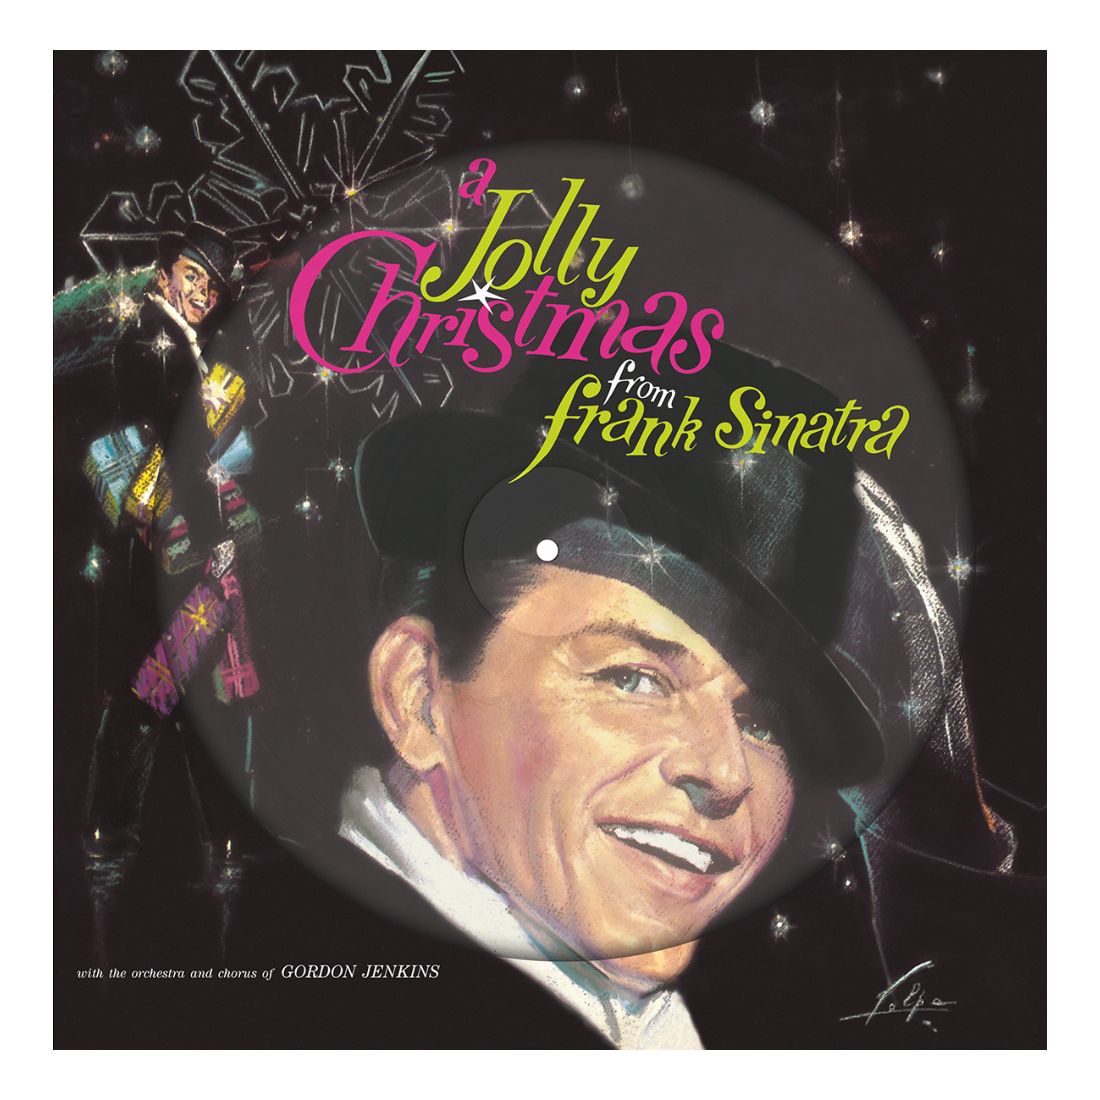 Виниловая пластинка A Jolly Christmas from Frank Sinatra (Picture Disc) | Frank Sinatra виниловая пластинка frank sinatra a jolly christmas from frank sinatra picture disc